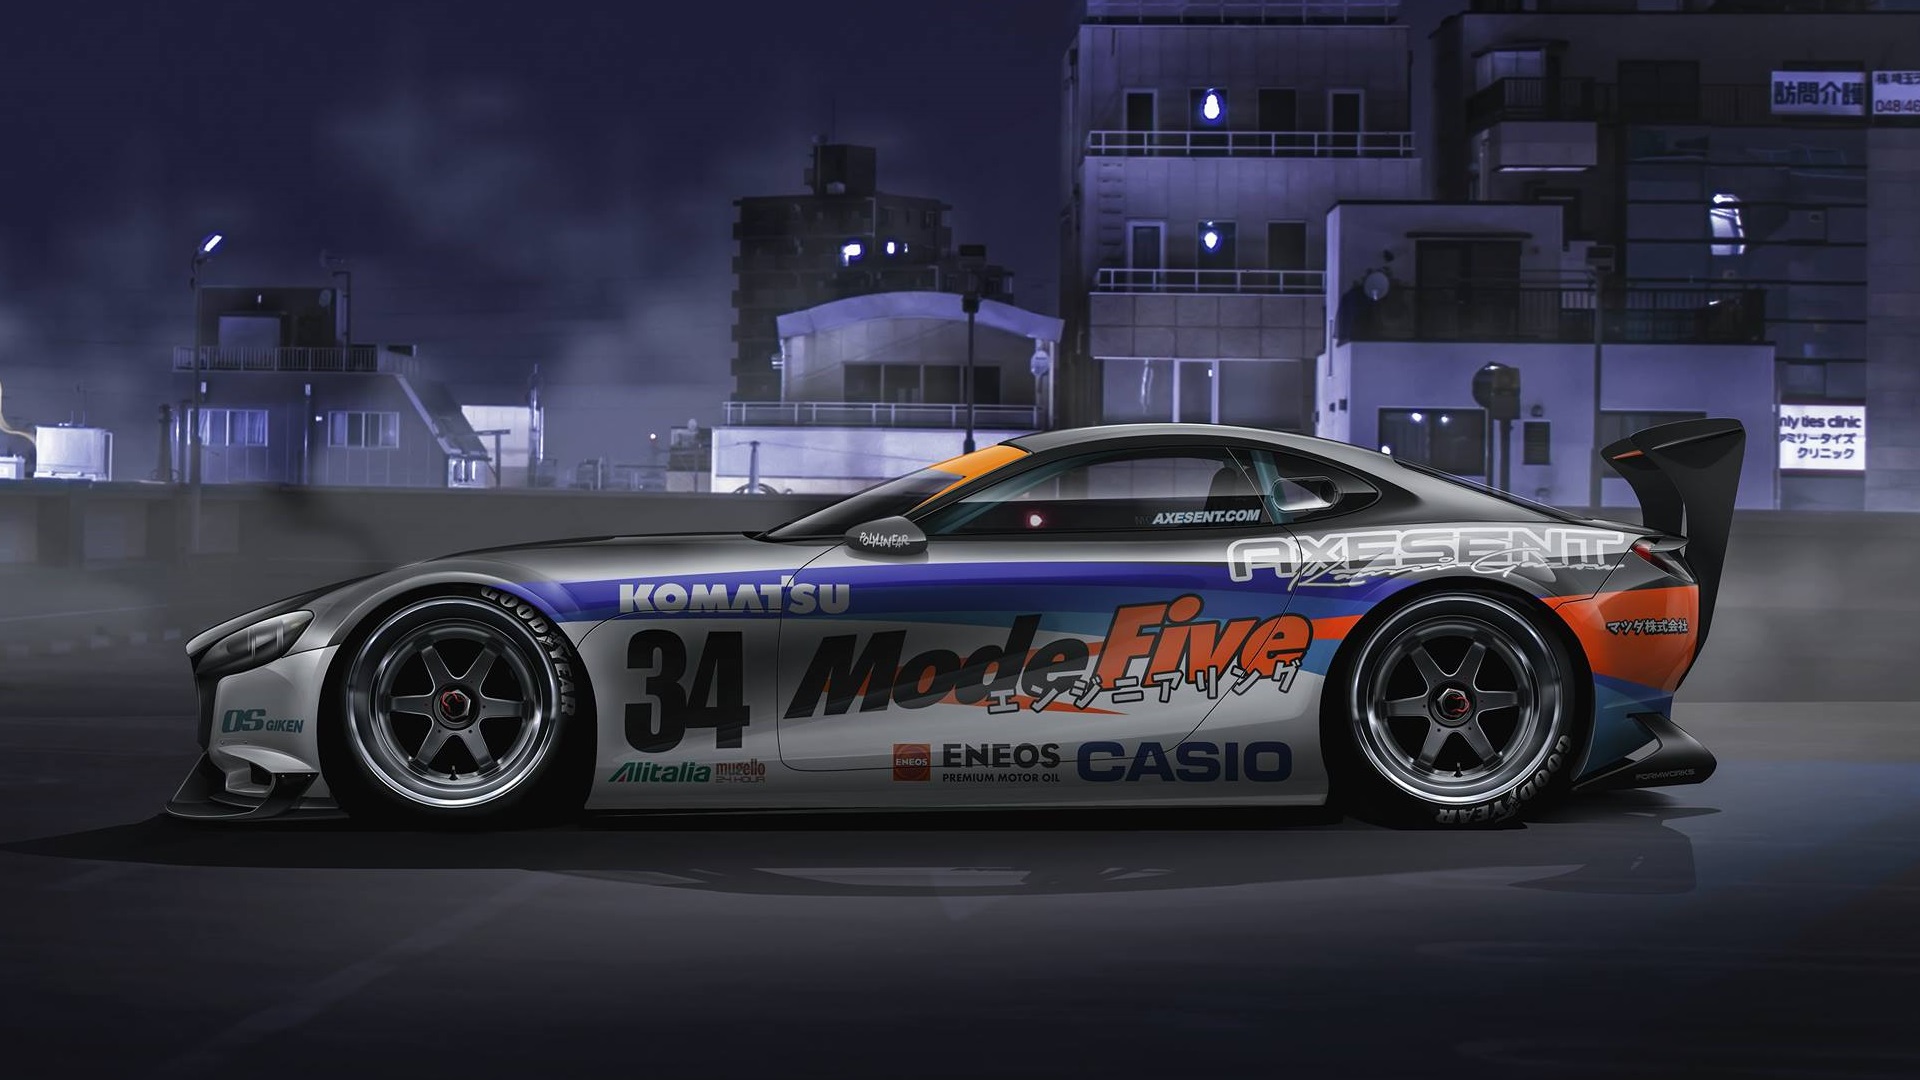 General 1920x1080 Axesent Creations CGI race cars Mazda RX-Vision Japanese cars Mazda side view silver cars